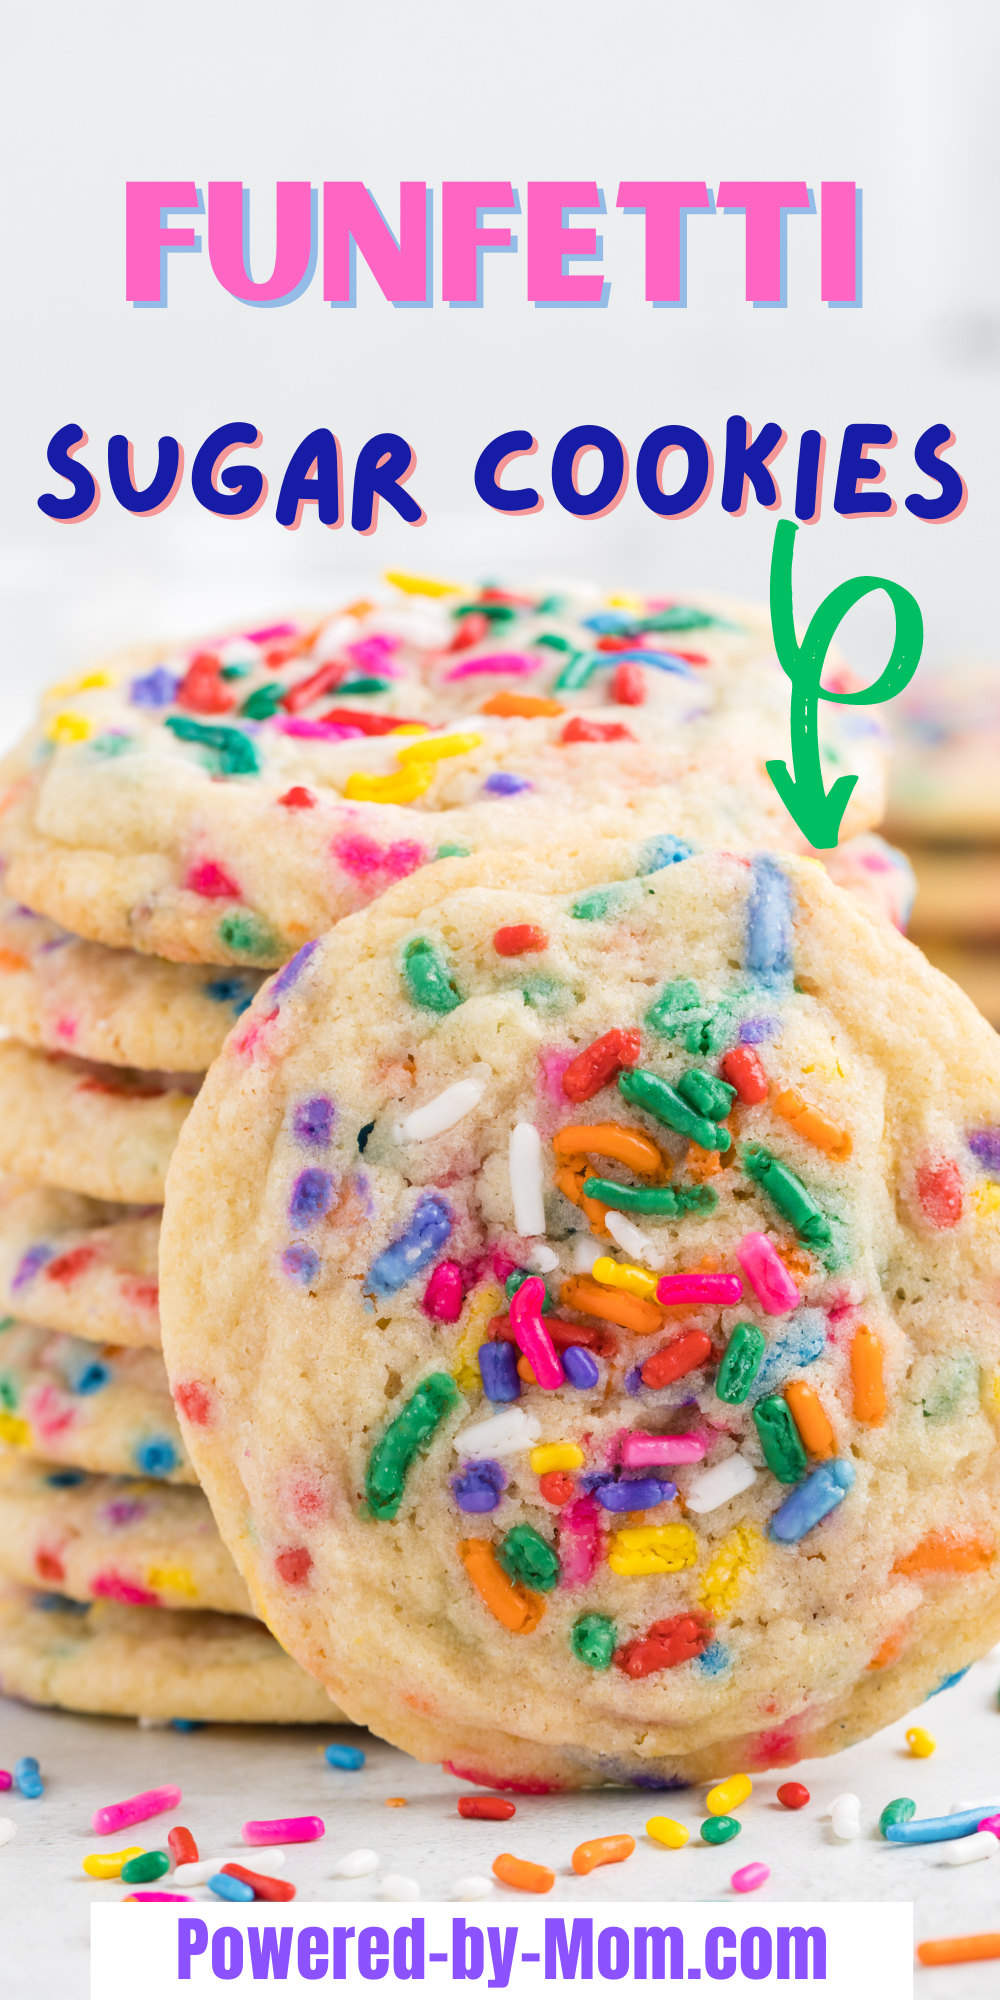 This Funfetti Cookies Recipe is a delicious treat of soft and chewy sugar cookies with colorful and decorative sprinkles. The funfetti sugar cookies are very easy to make from scratch with ingredients you probably already have in your kitchen.  Get the recipe now.